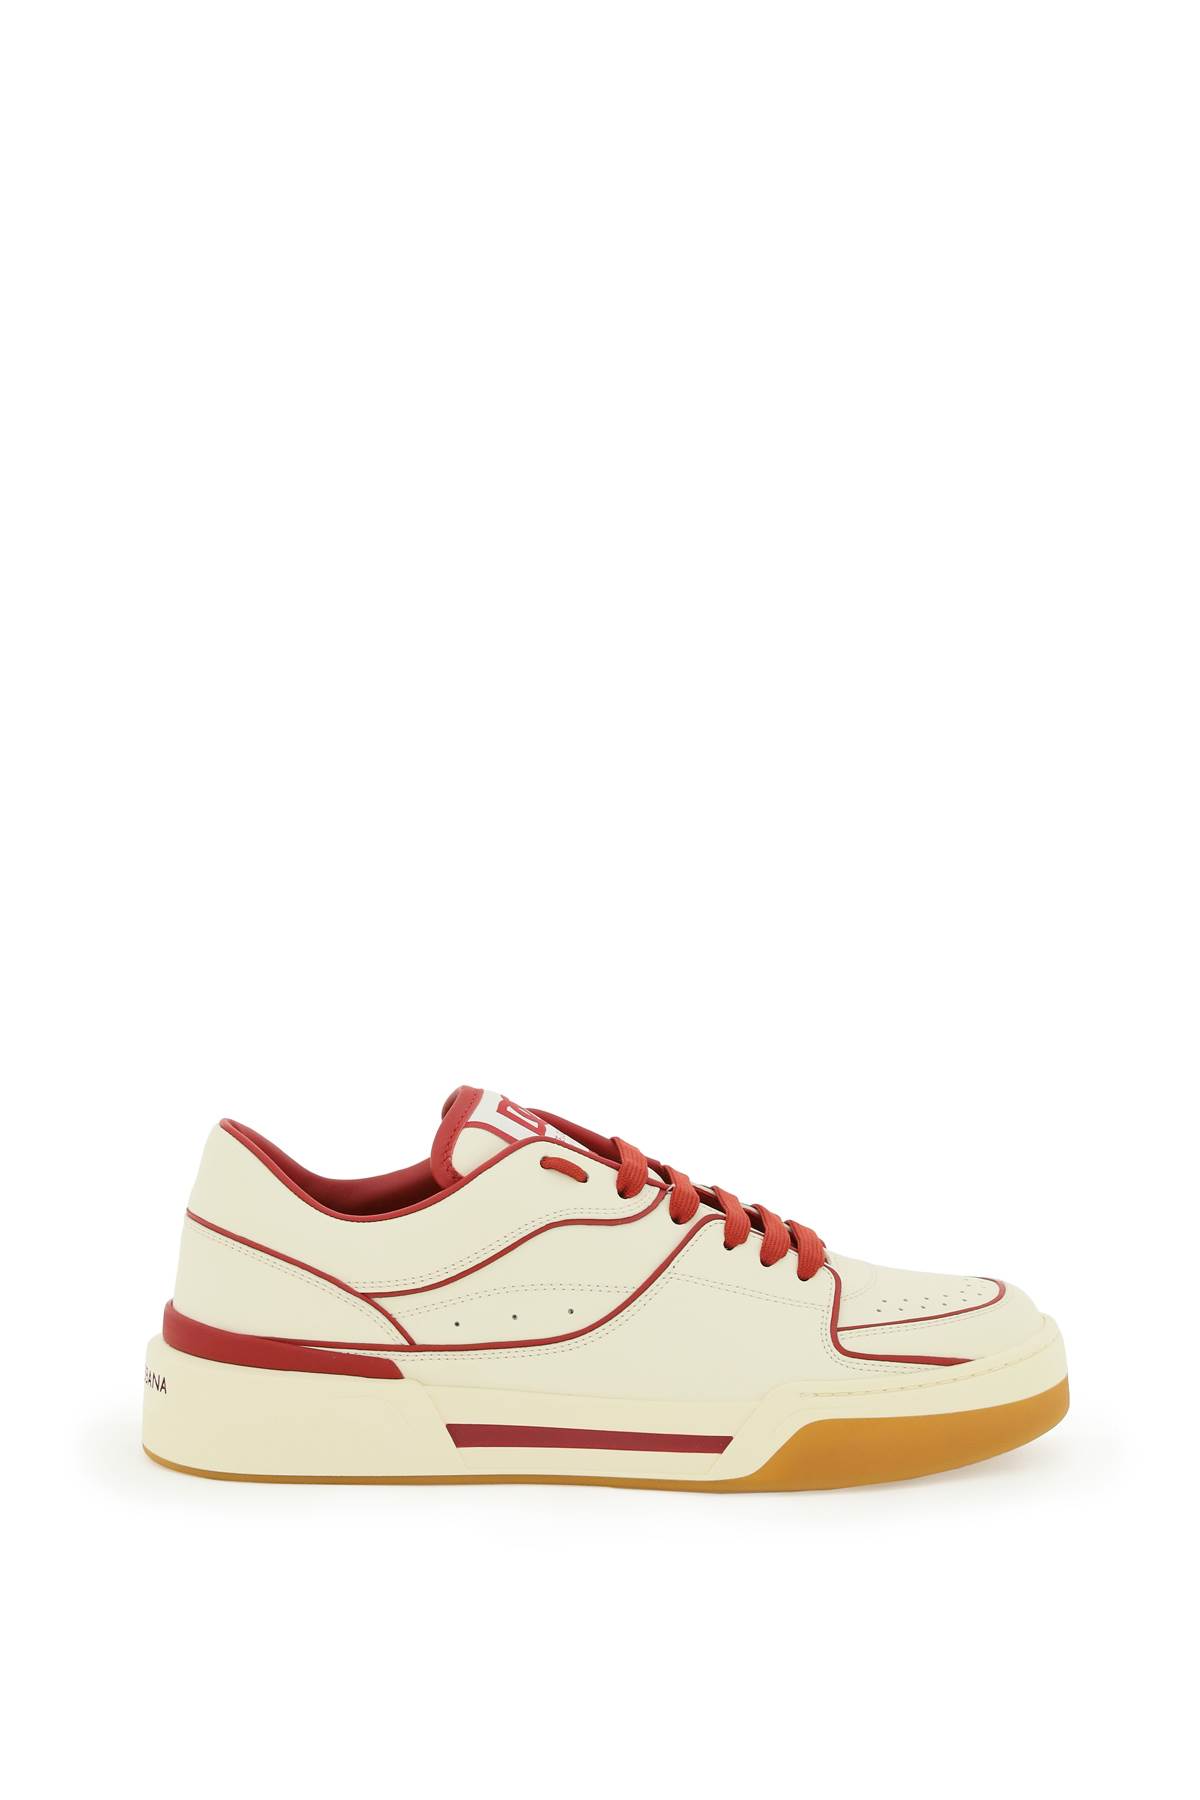 Dolce & Gabbana new Roma Leather Sneakers